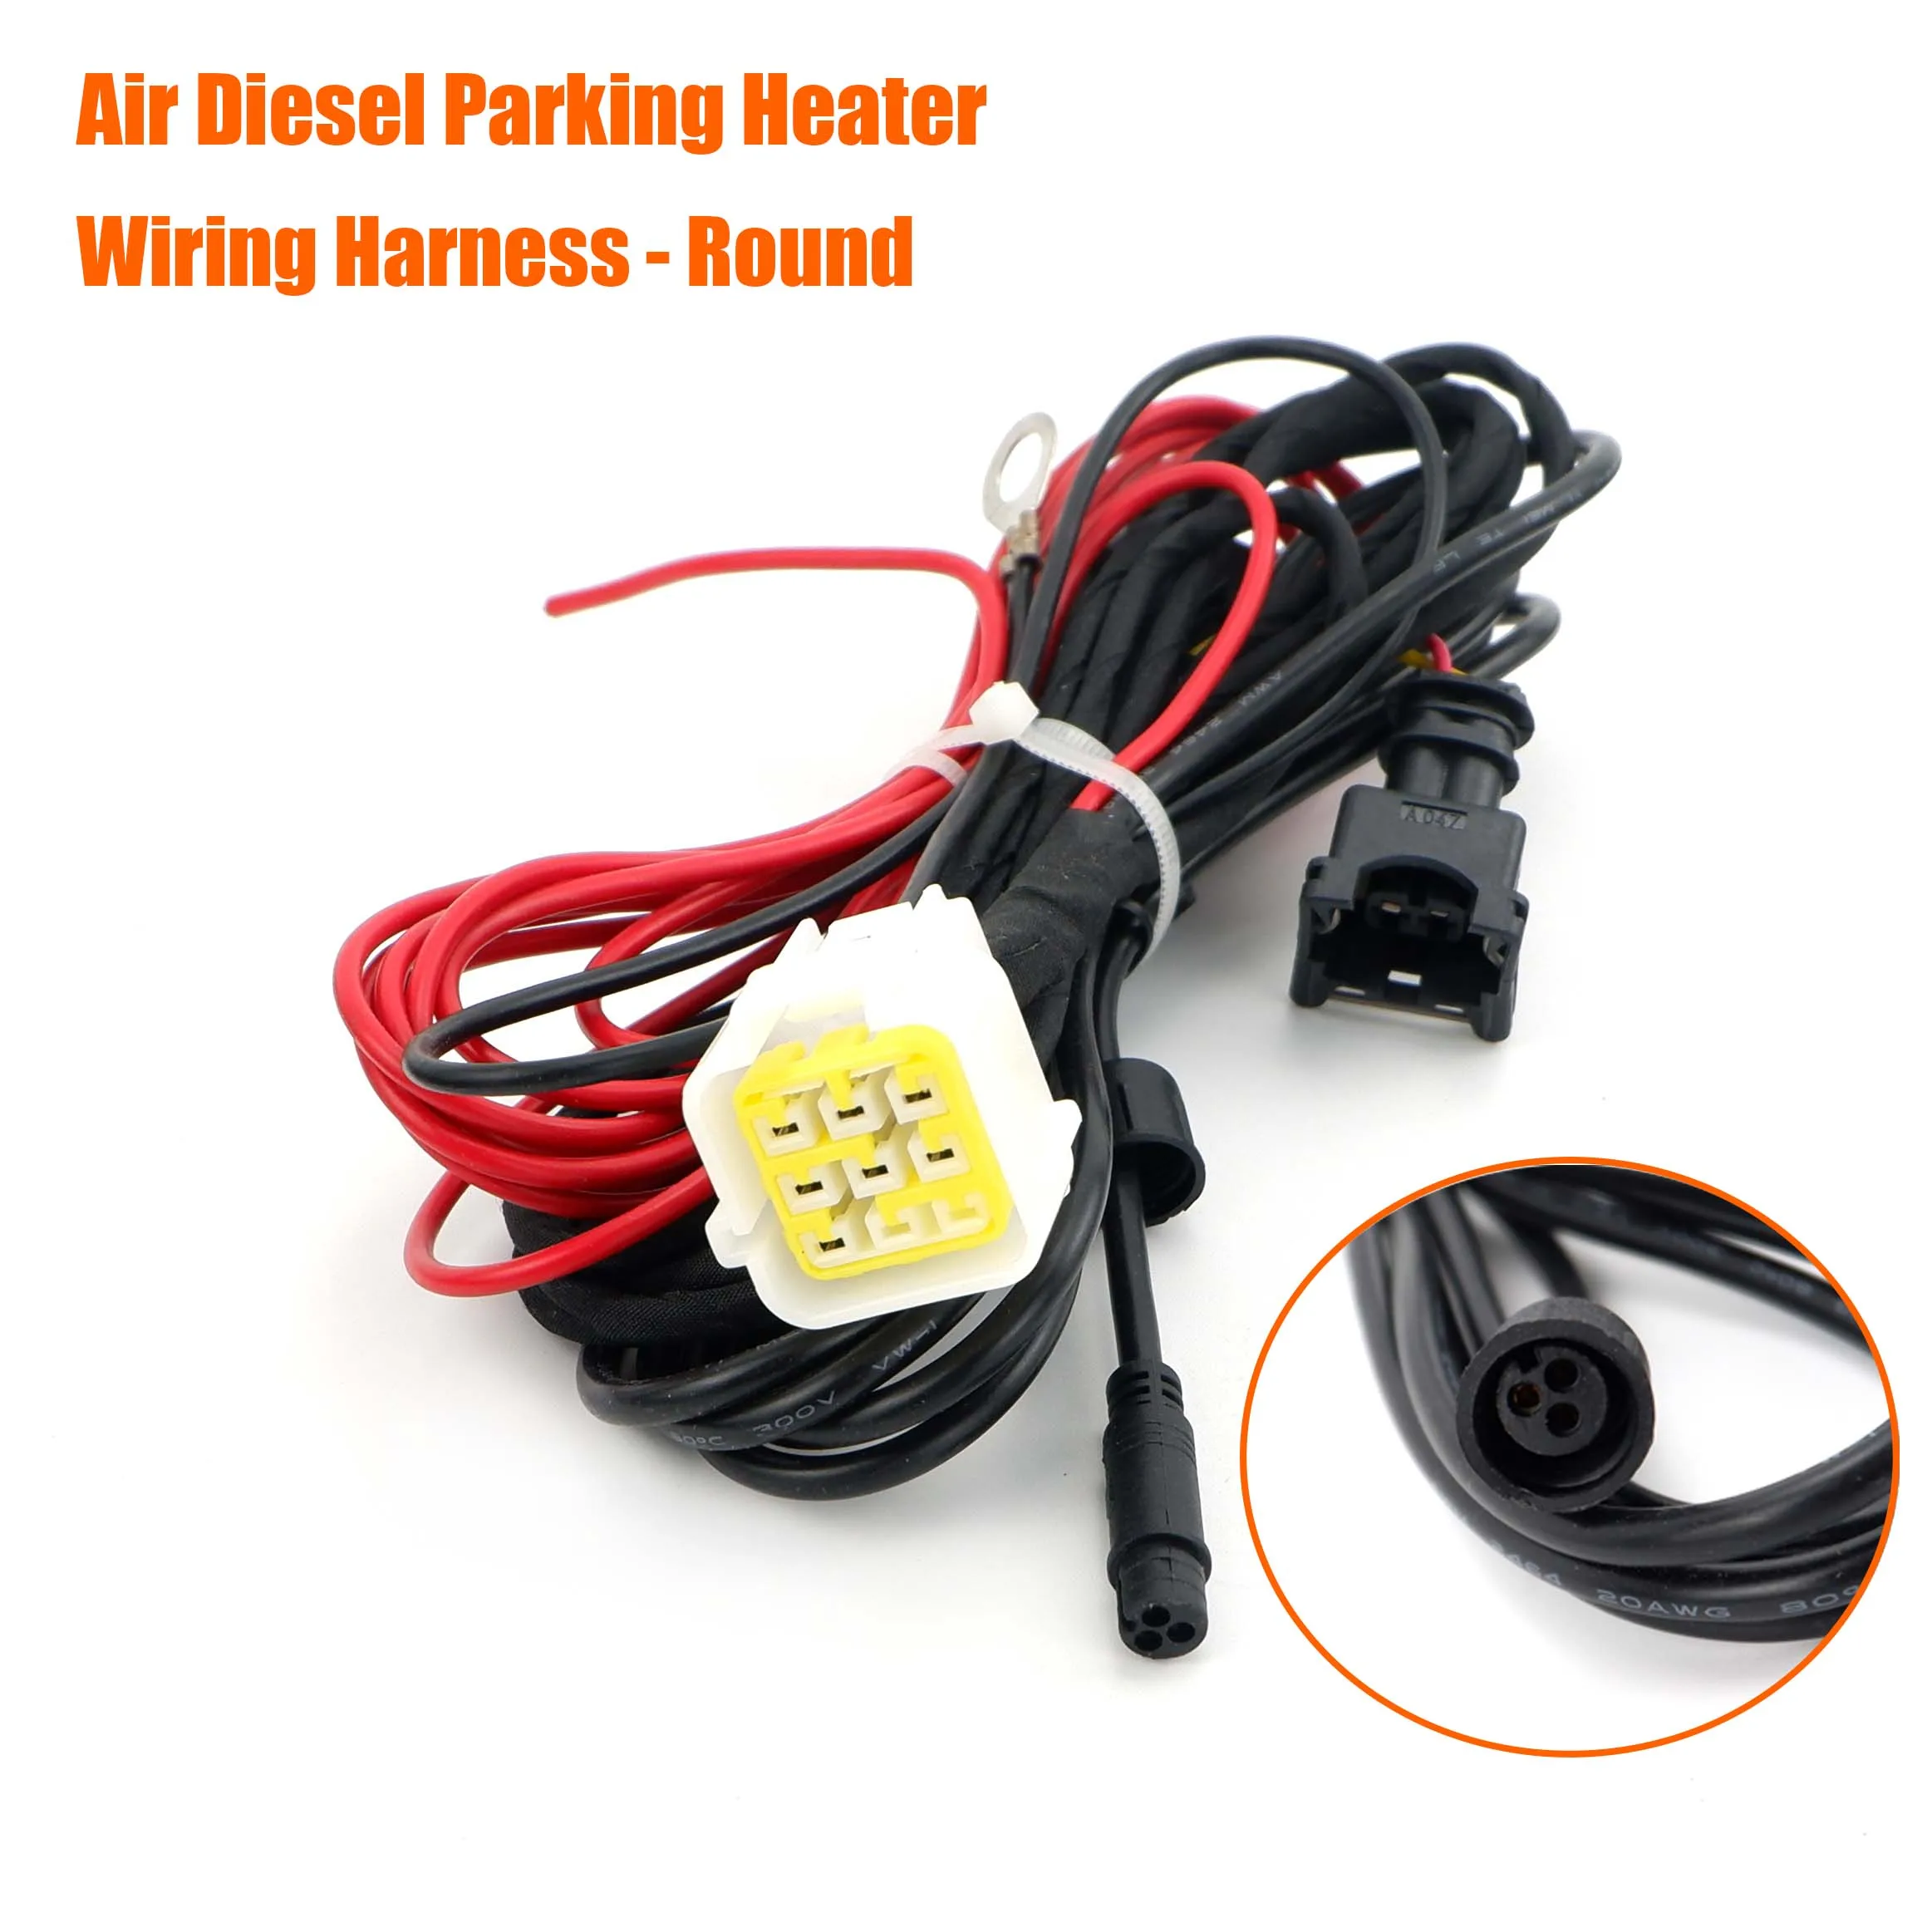 12V / 24V Air Diesel Parking Heater Main Wire Harness For Eberspacher  Webasto Supply Cable Adapter Car Truck Heater Parts - AliExpress